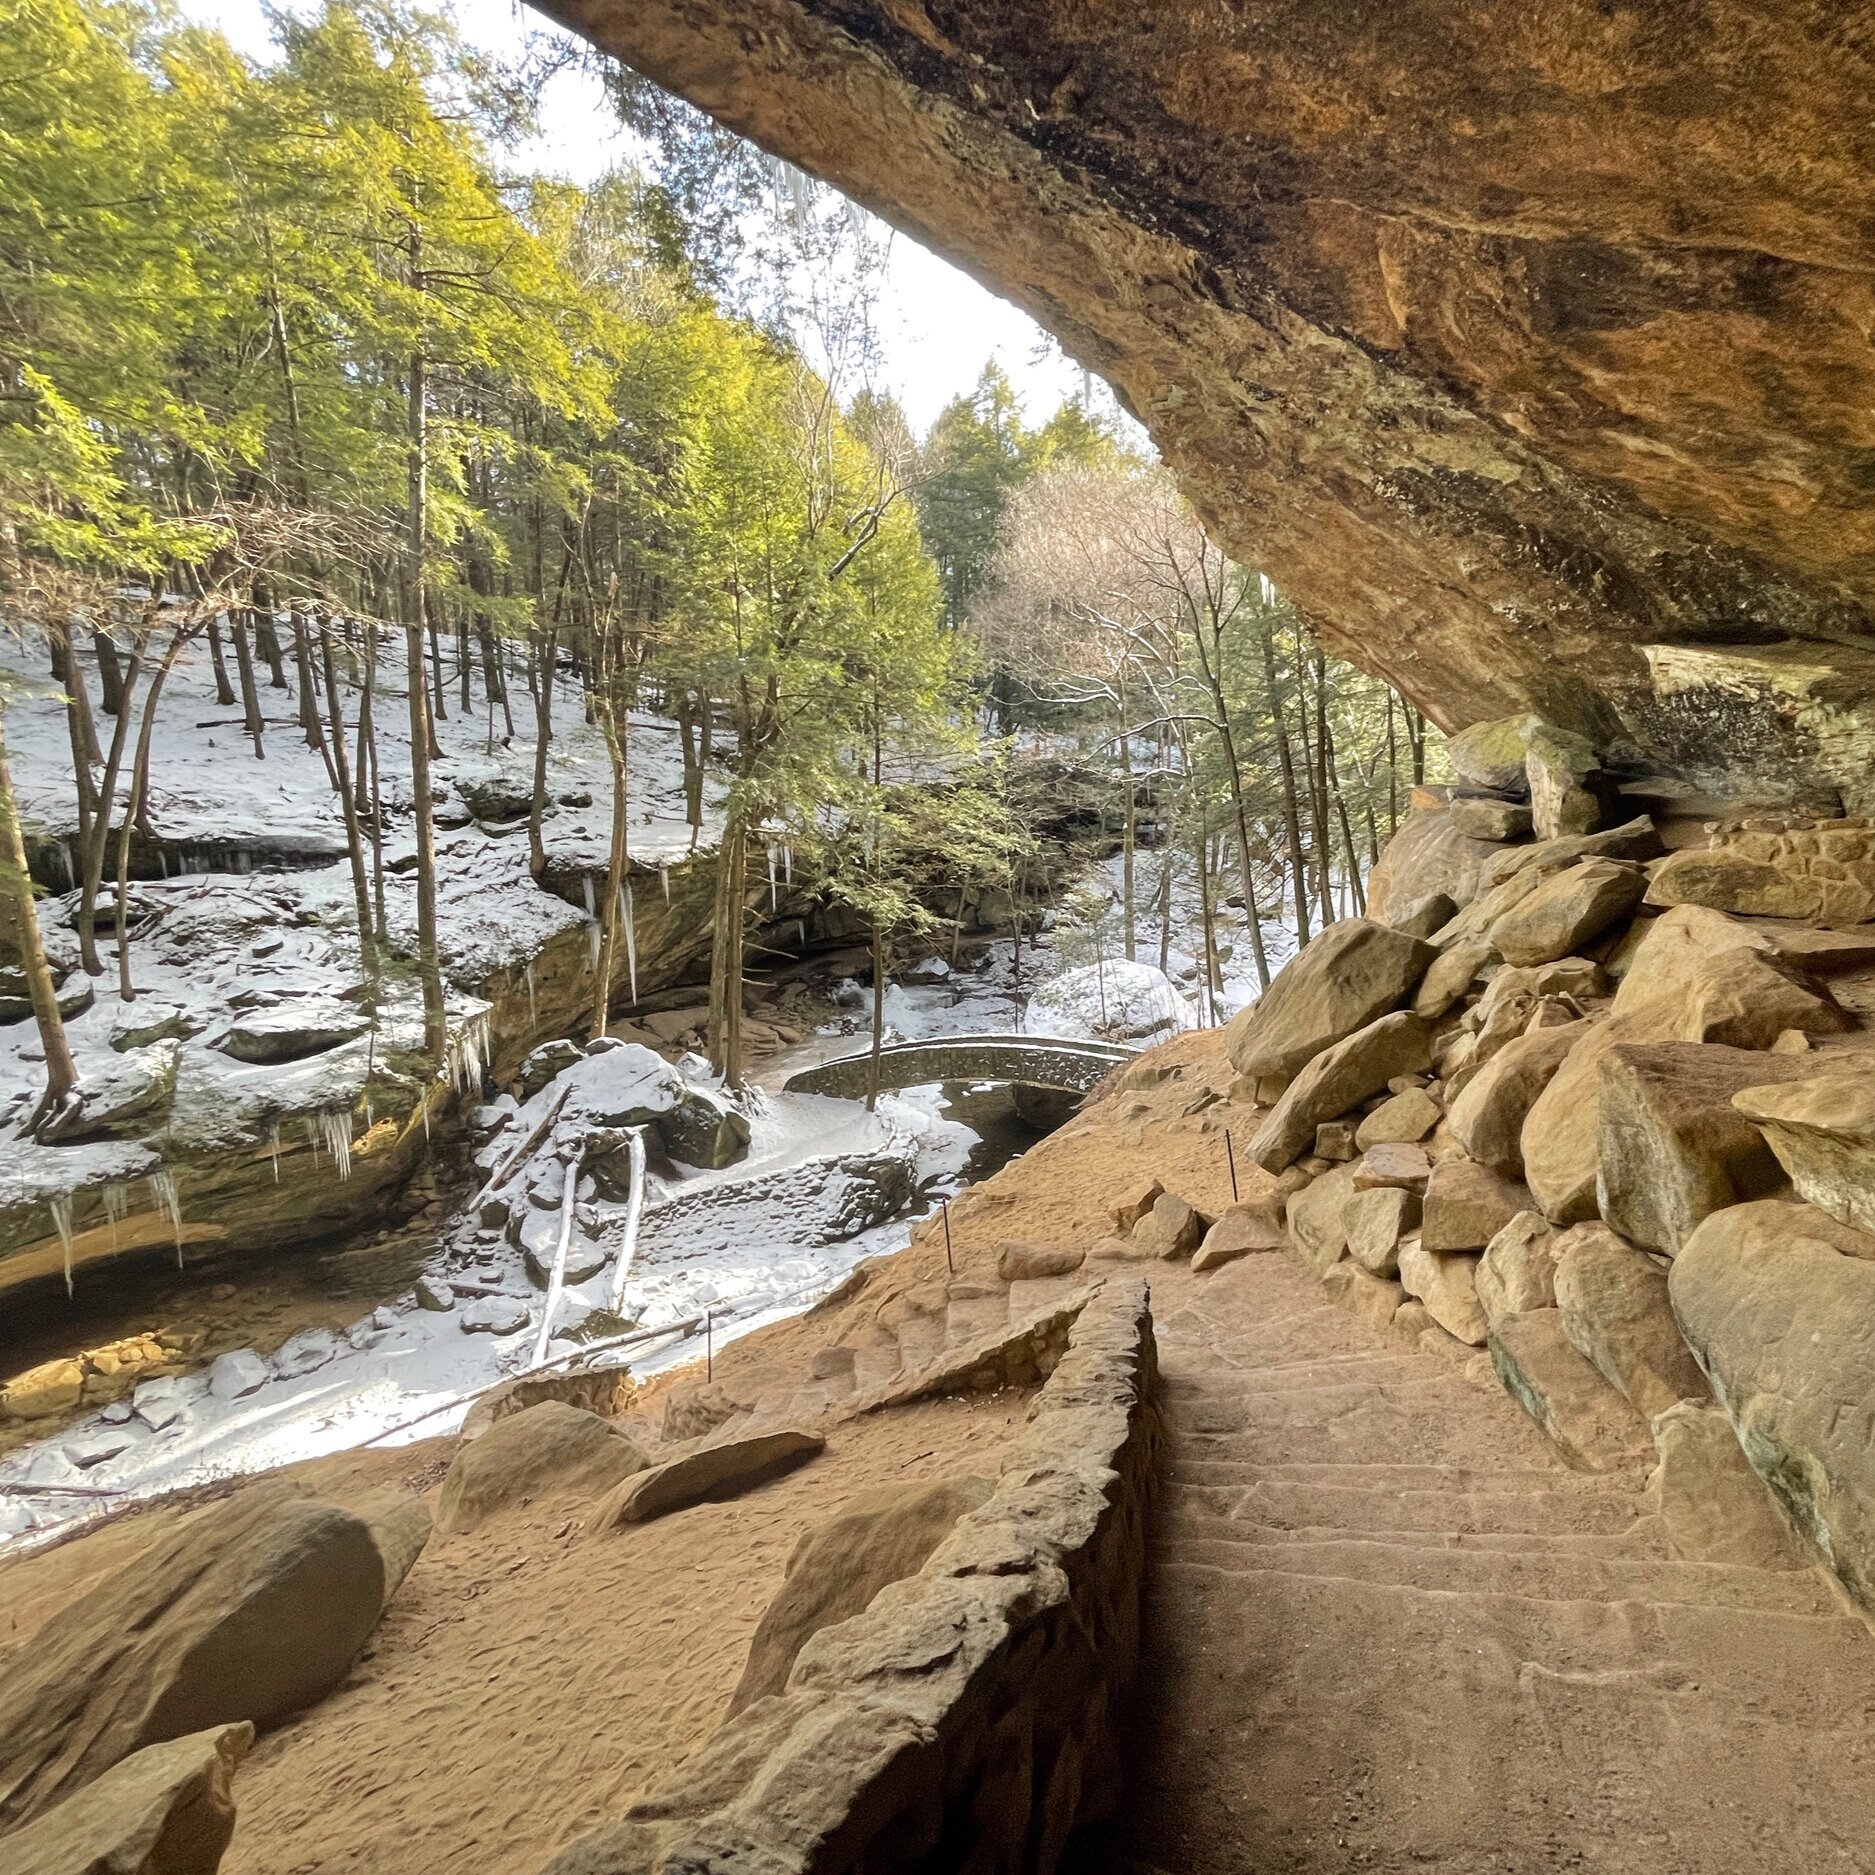 Hike the Full Old Man’s Cave Loop at Hocking Hills State Park